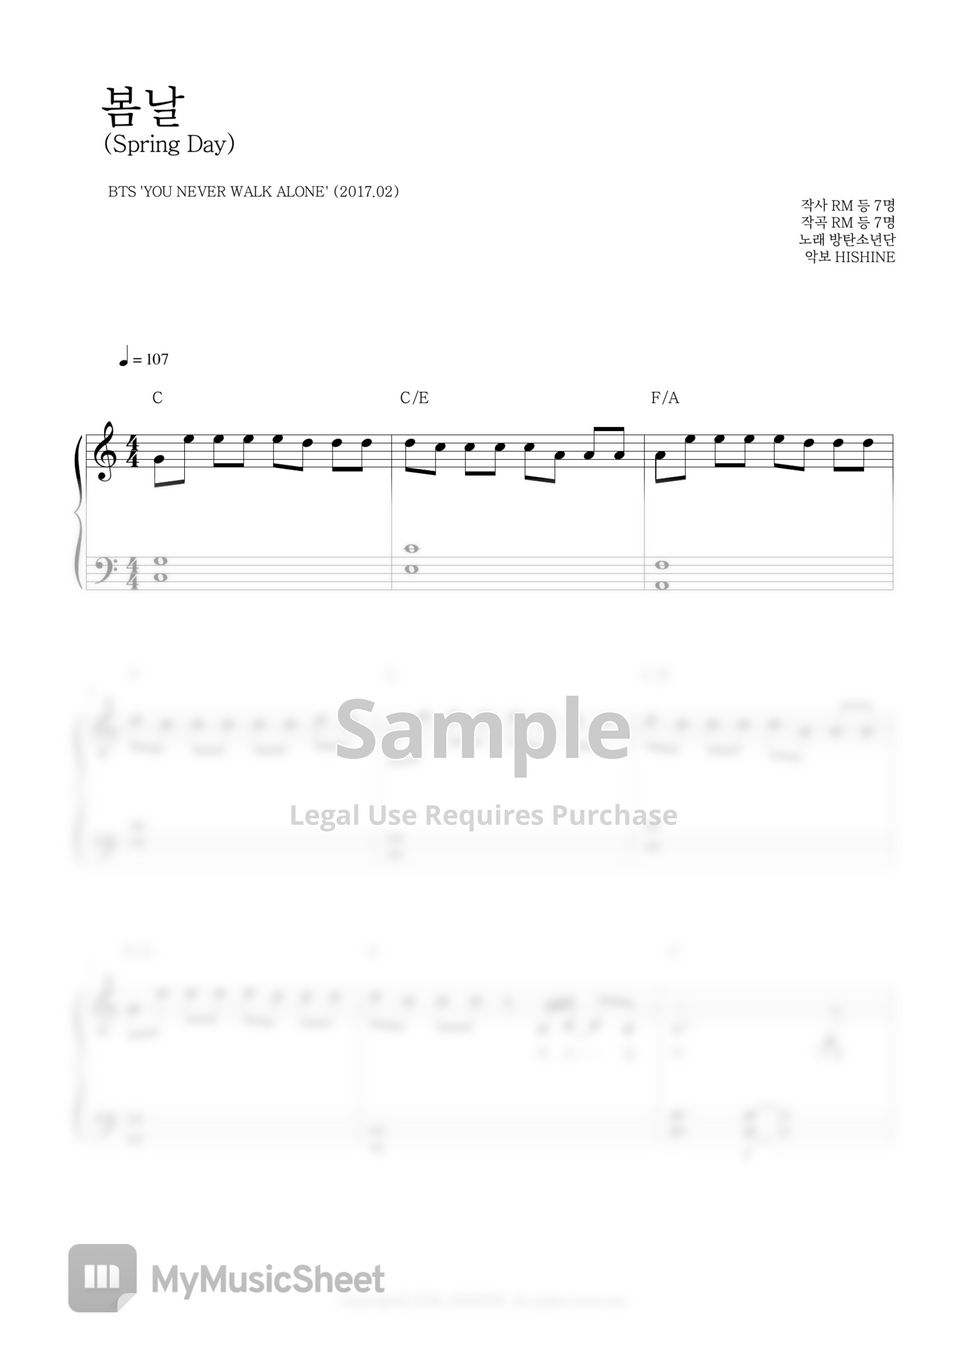 BTS 'Spring Day' Easy Piano Sheet Music